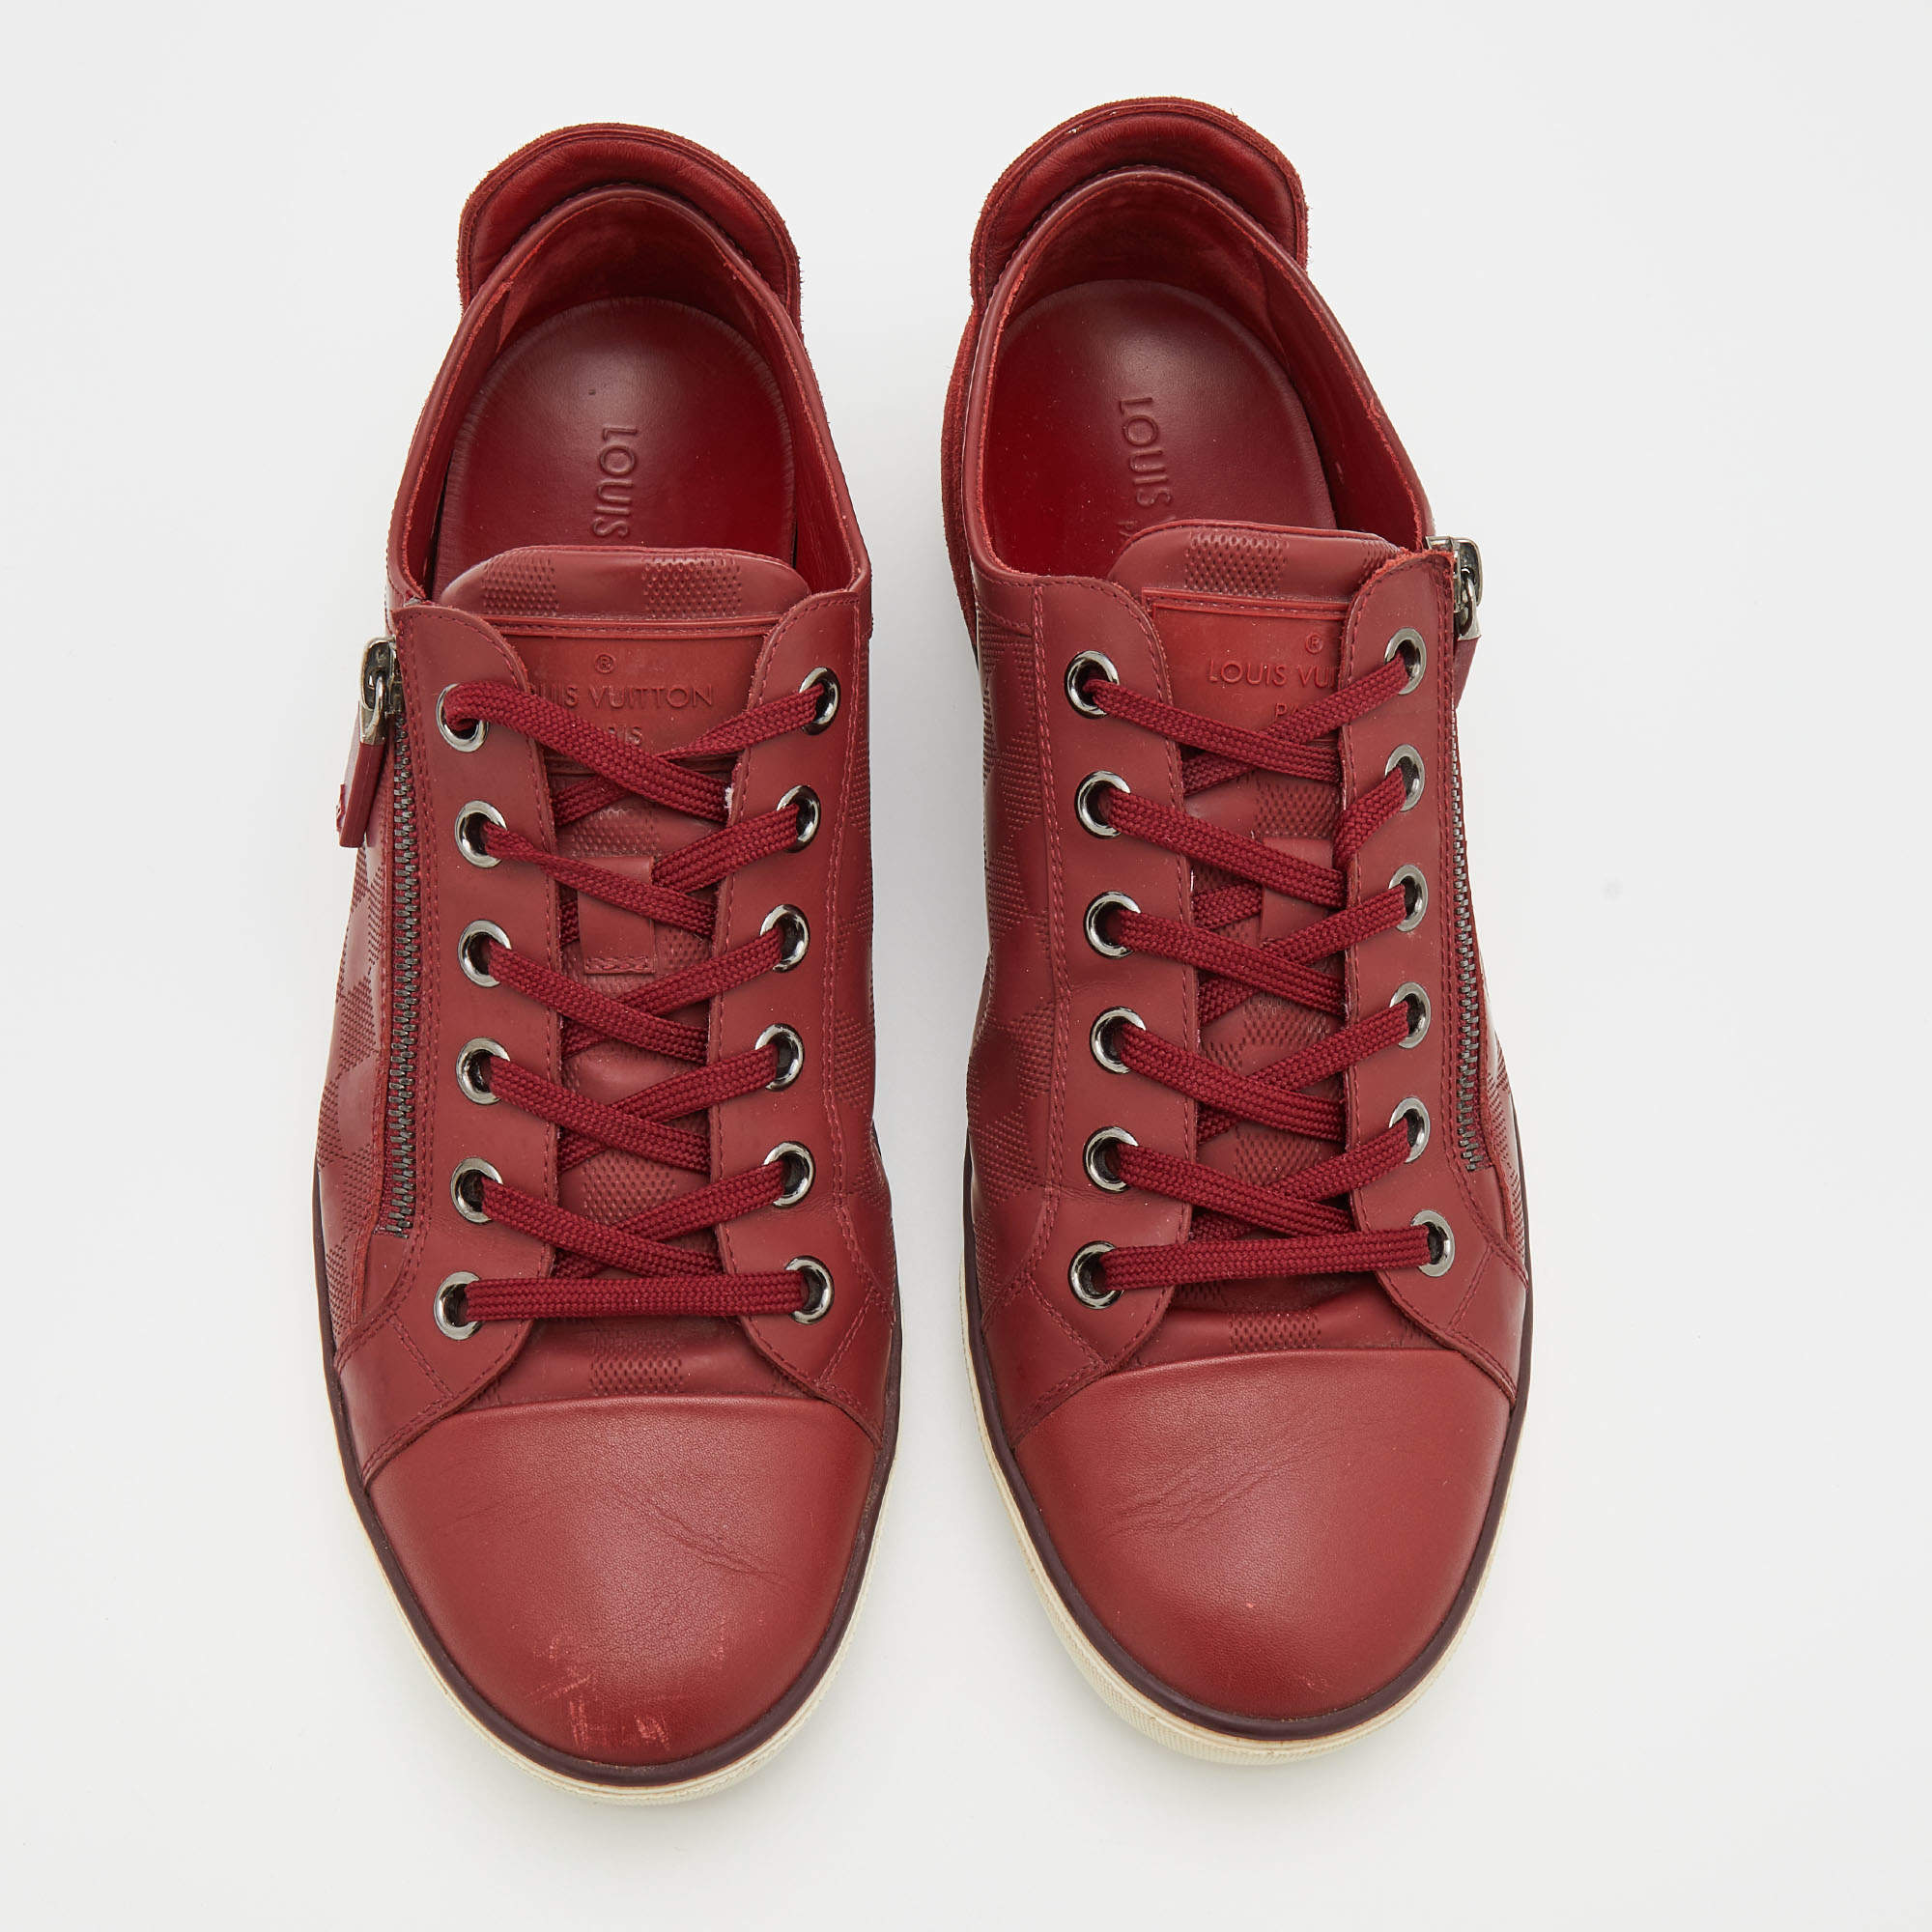 Louis Vuitton Red Leather And Suede Low Top Sneakers Size 42 Louis